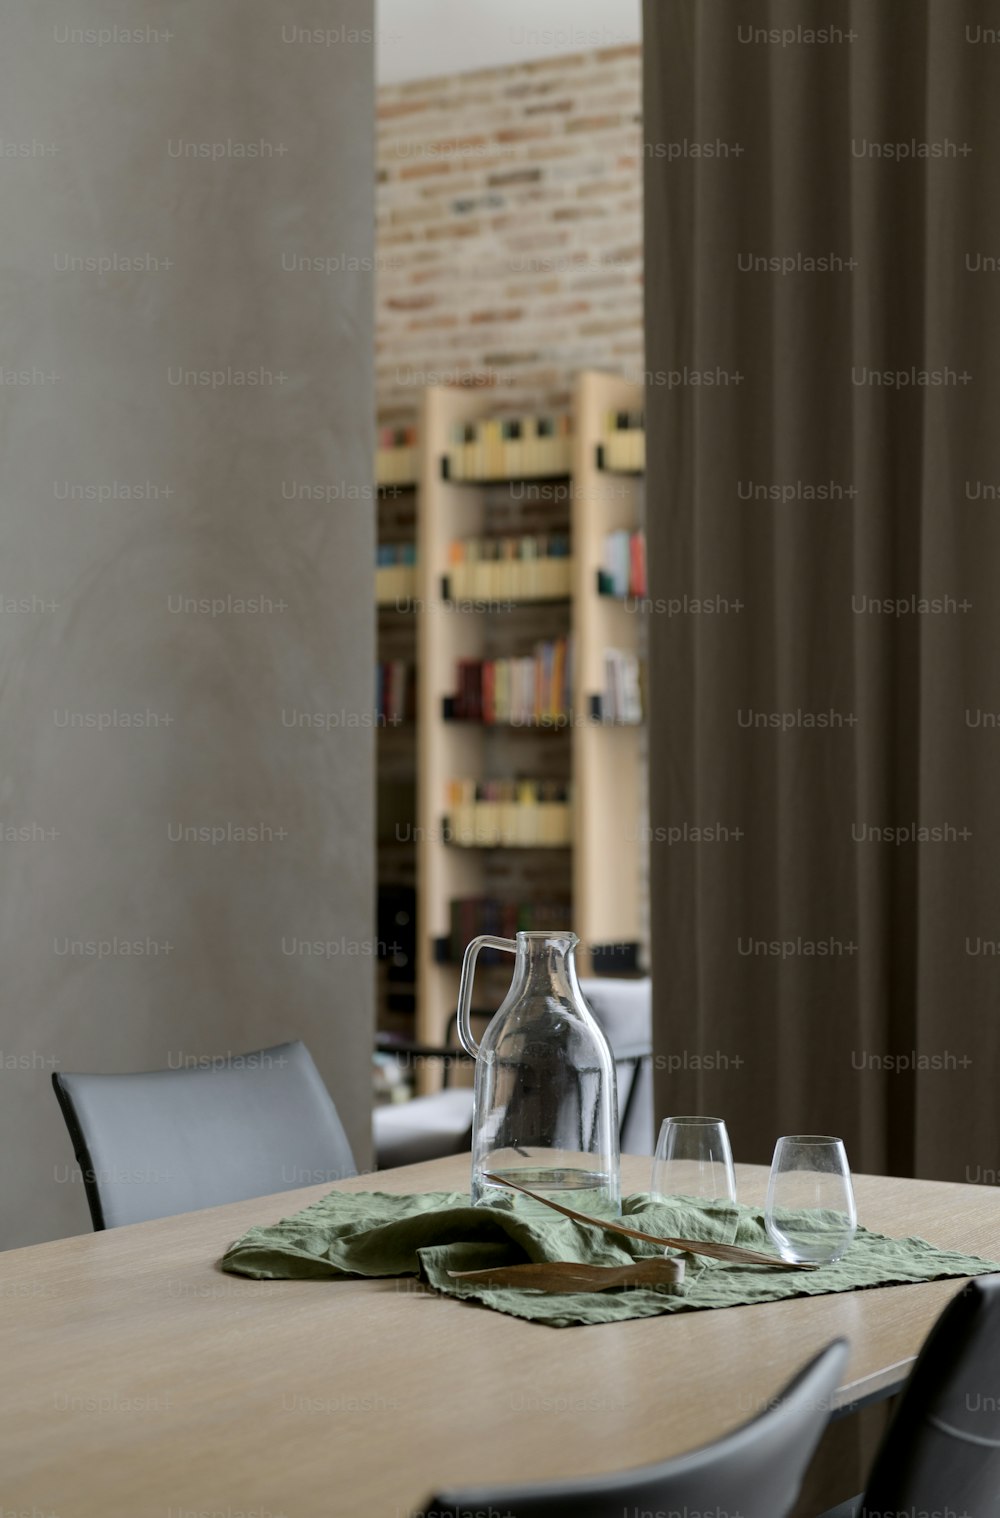 a wooden table topped with a bottle of wine